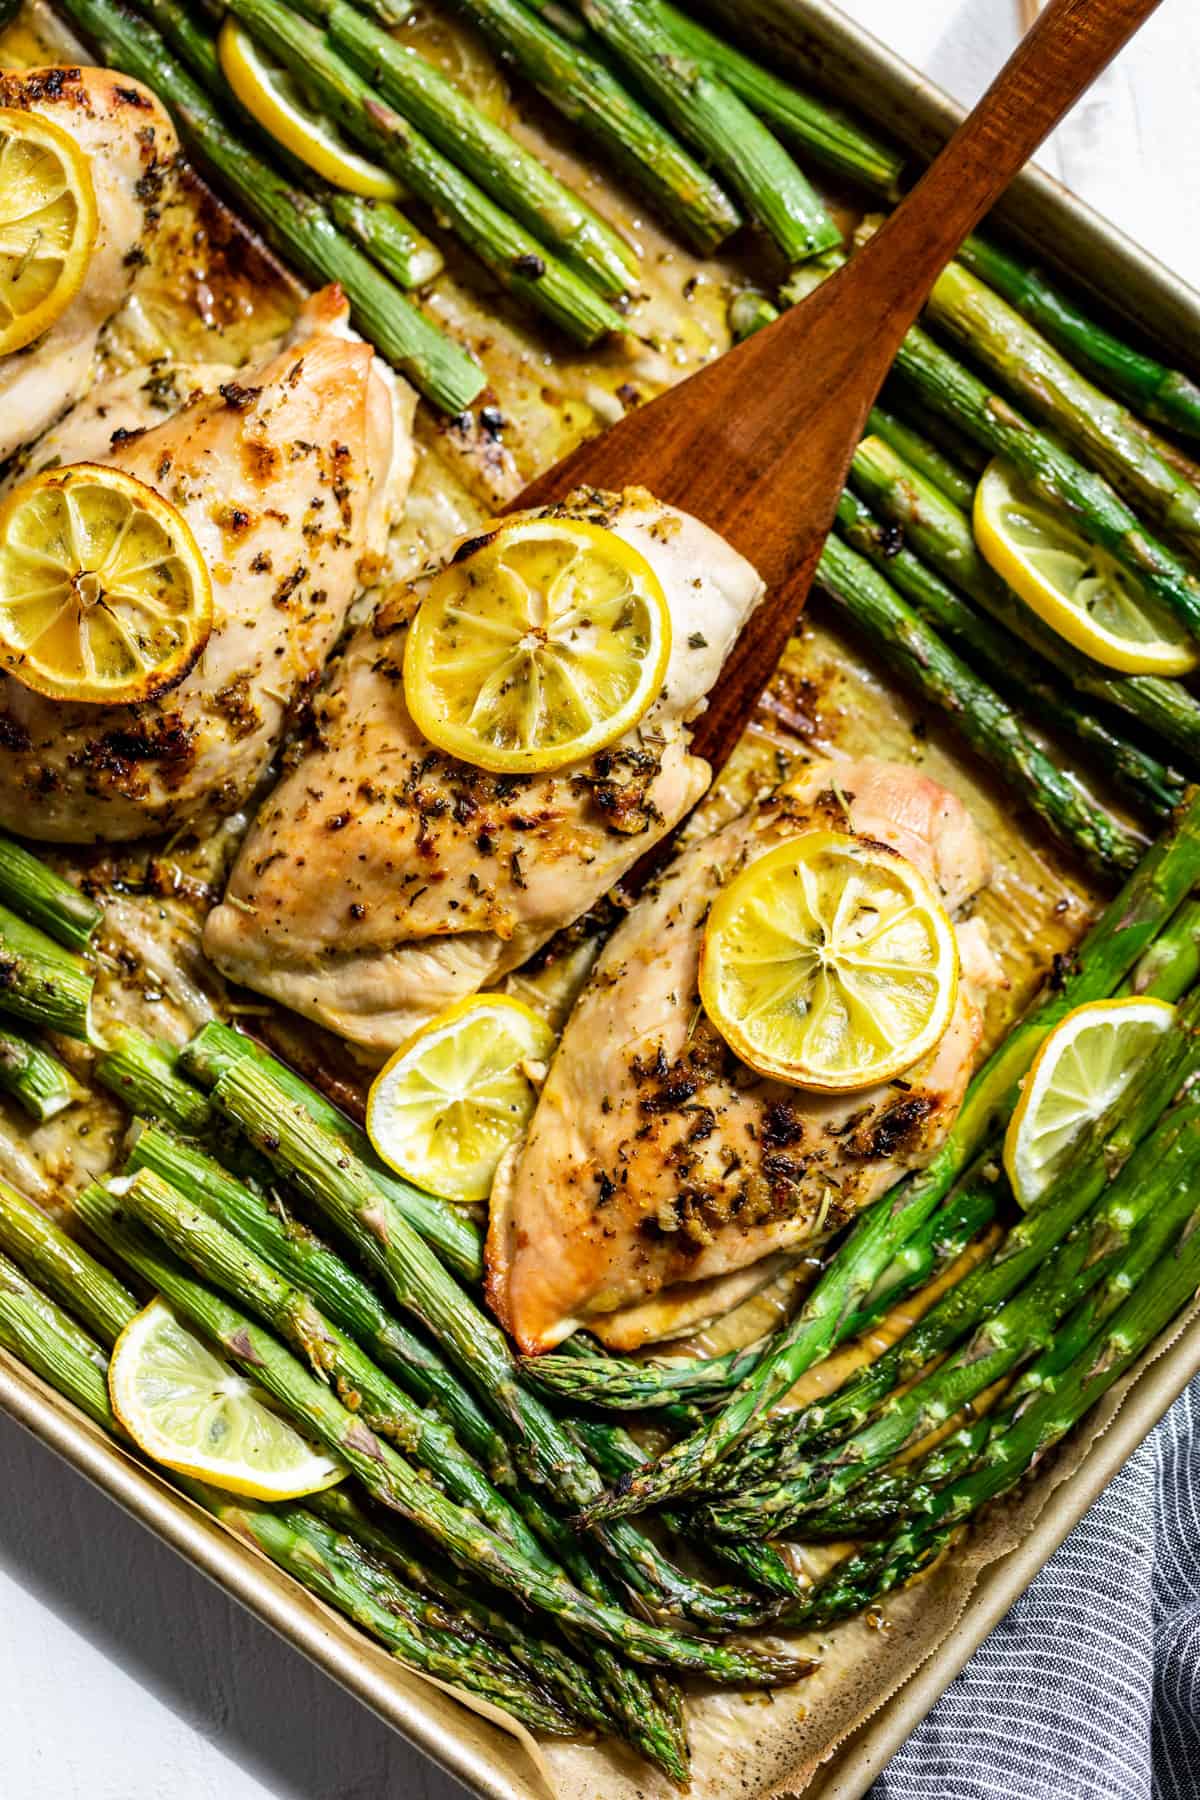 45 degree angle shot of finished Lemon Chicken and Asparagus on a sheet pan with a wooden spatula.